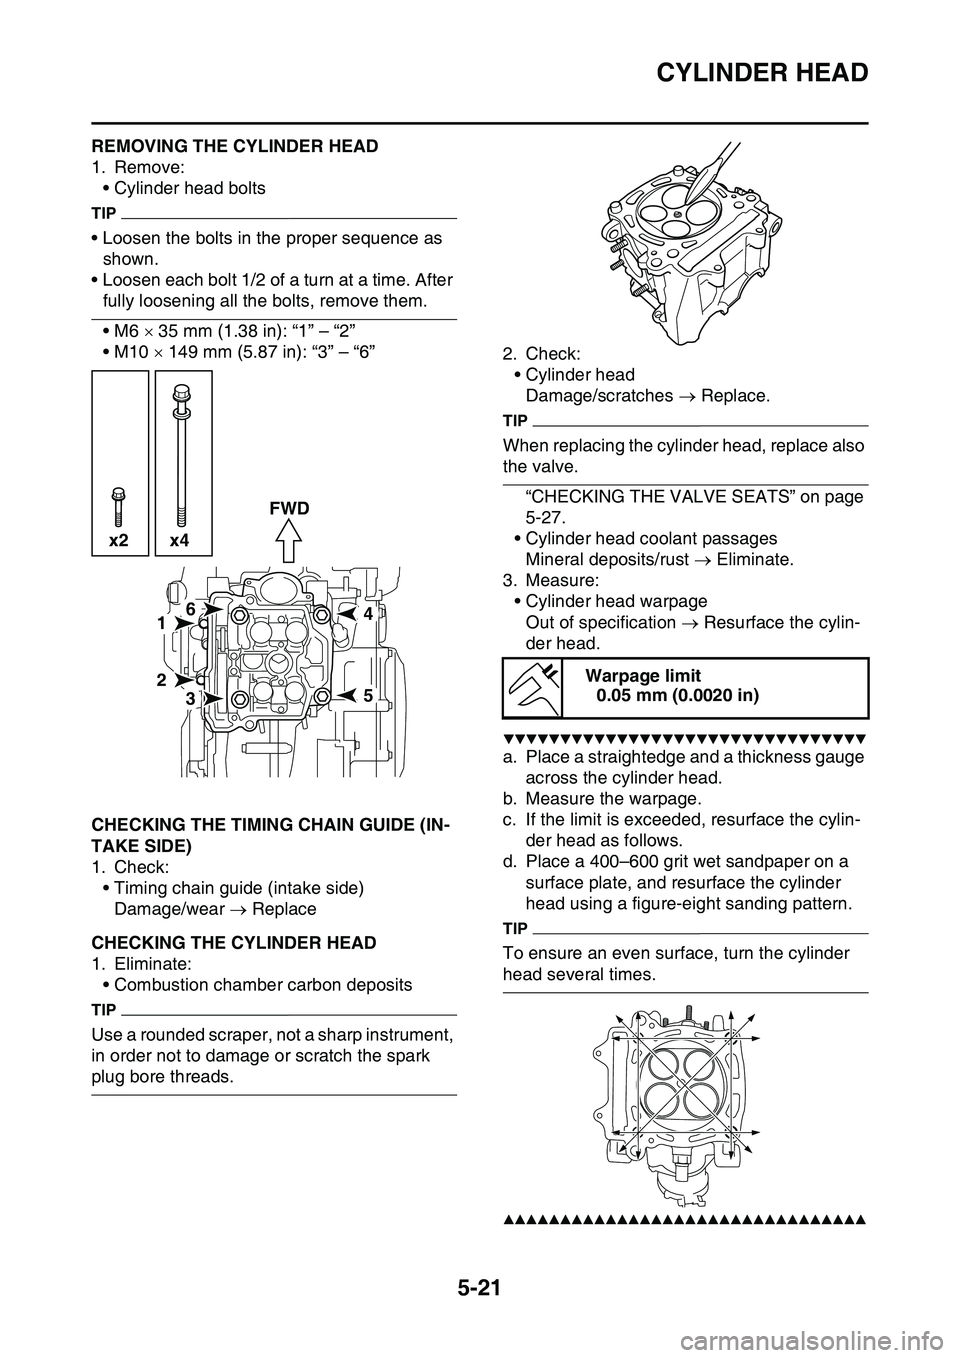 YAMAHA YZ450F 2014  Owners Manual CYLINDER HEAD
5-21
EAS1SL1215REMOVING THE CYLINDER HEAD
1. Remove:
• Cylinder head bolts
TIP
• Loosen the bolts in the proper sequence as 
shown.
• Loosen each bolt 1/2 of a turn at a time. Afte